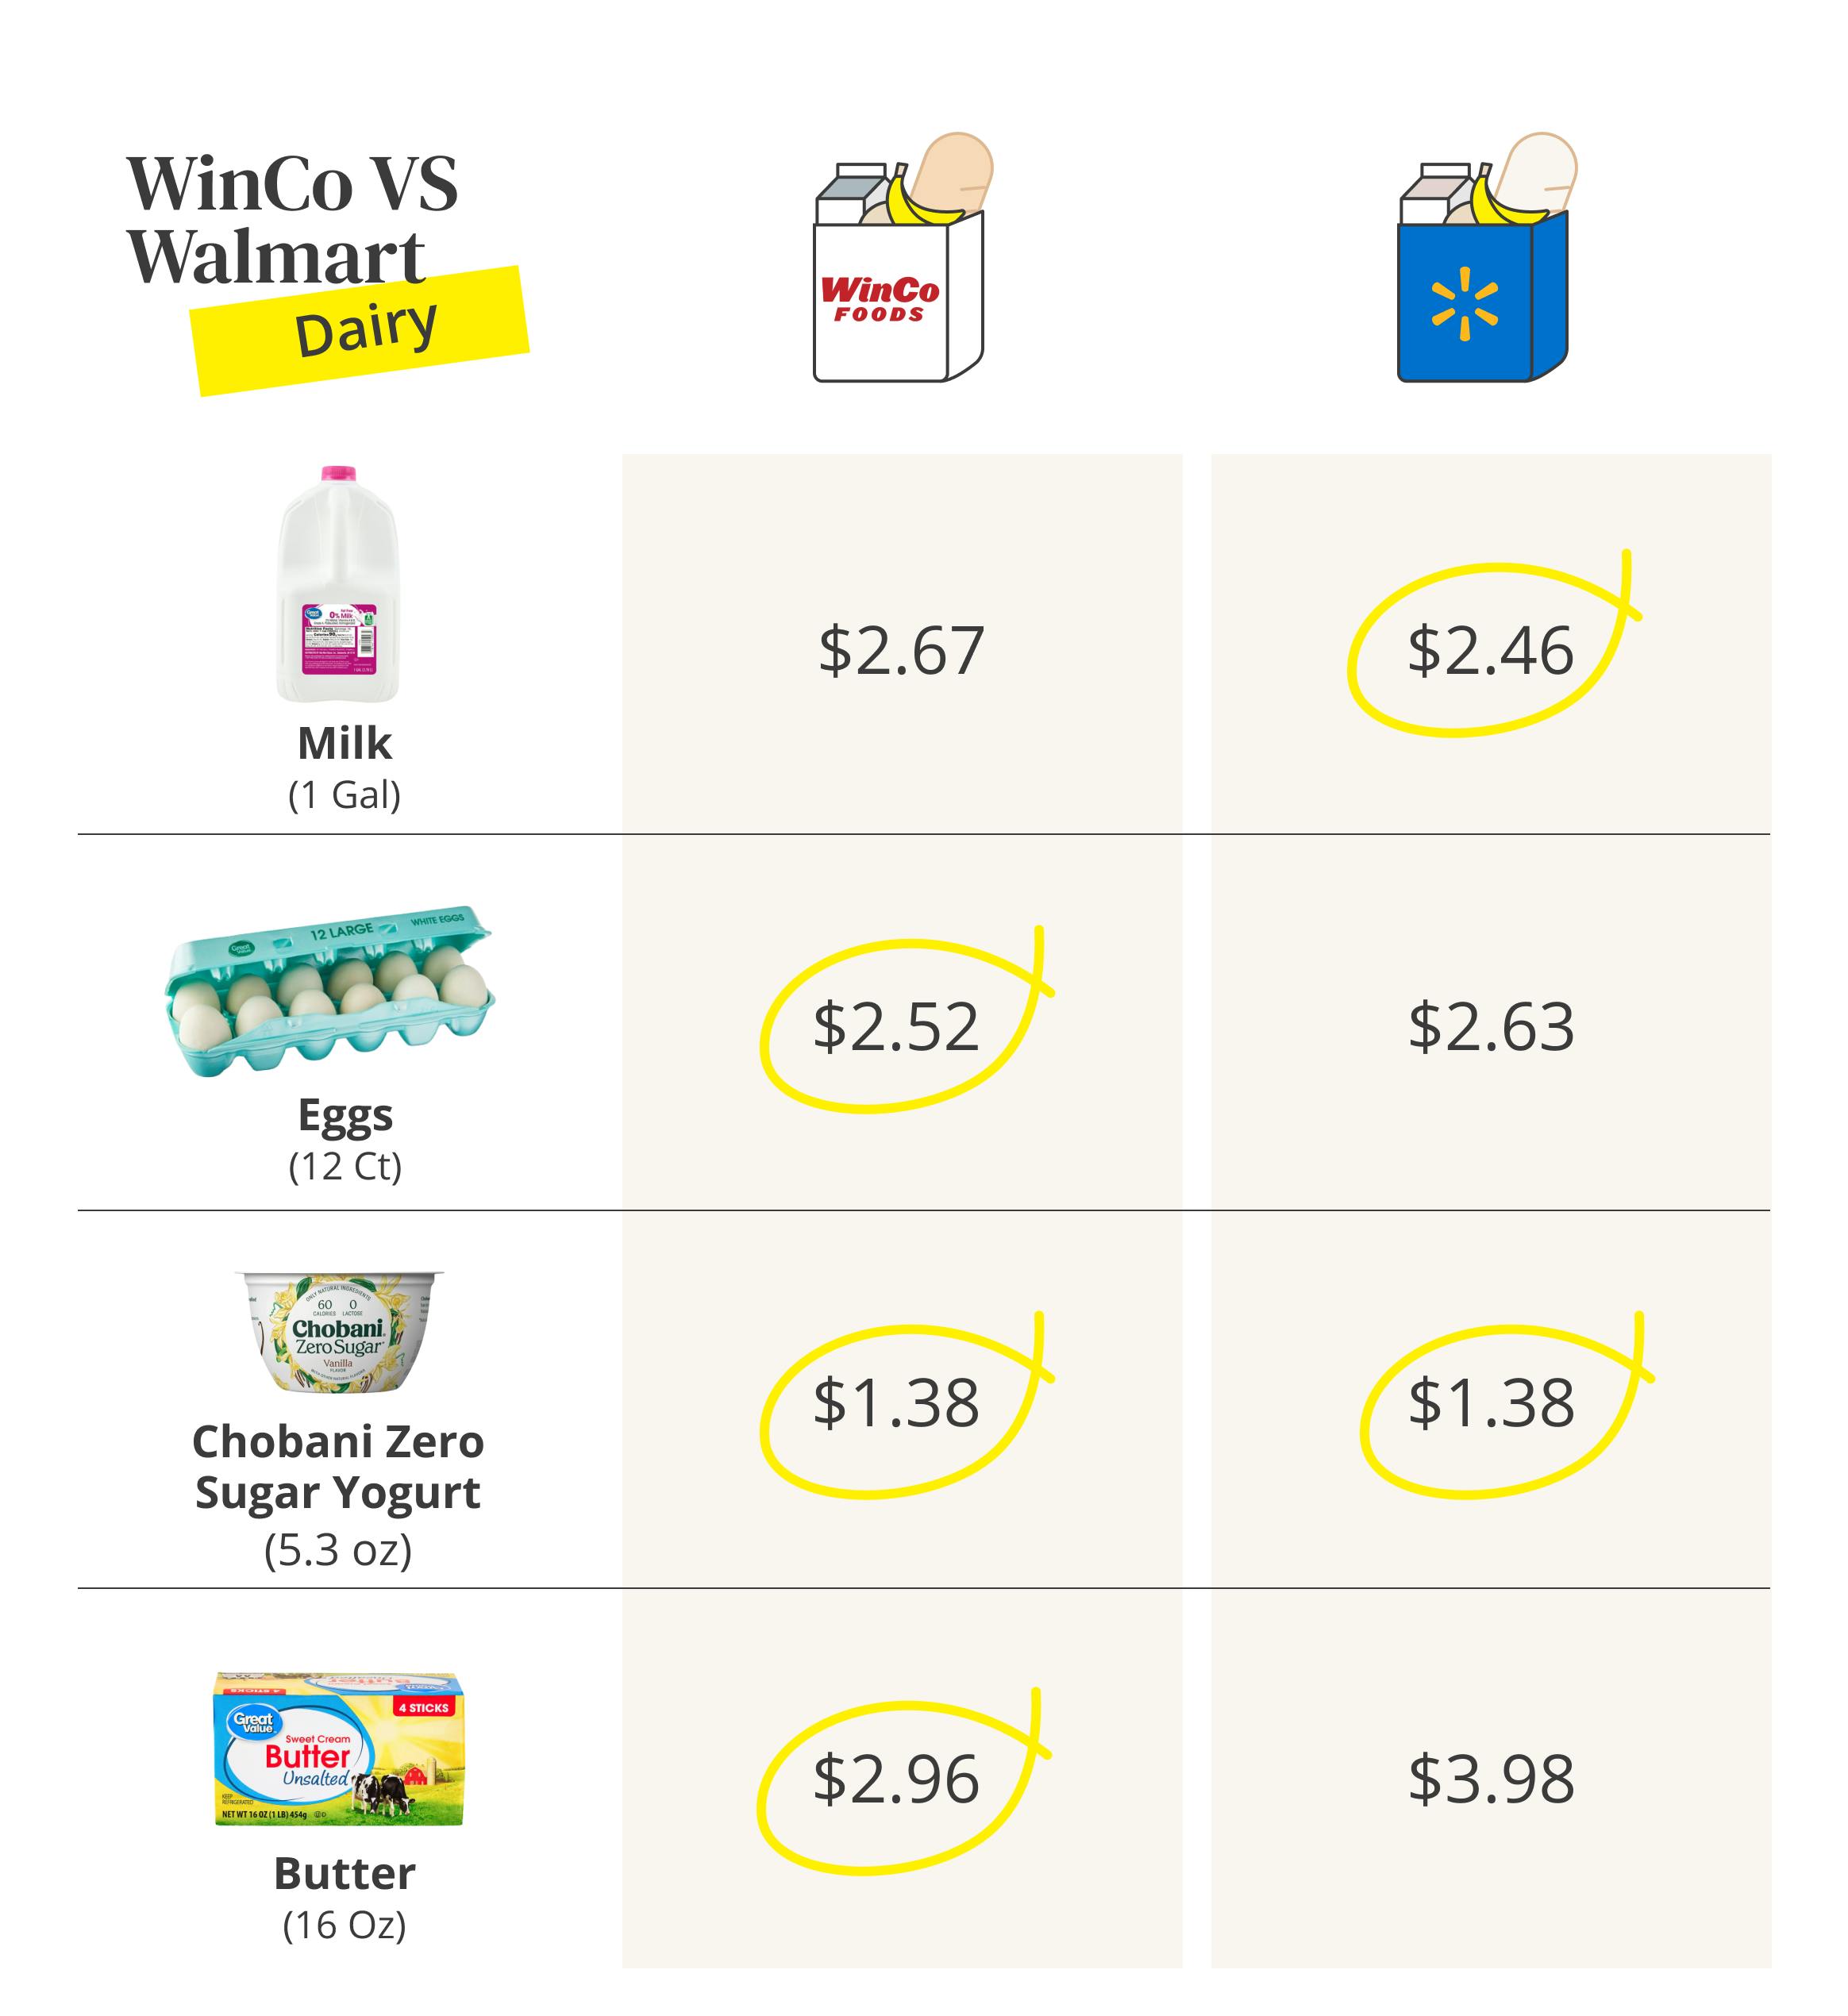 How WinCo prices compare to Walmart prices for dairy items.